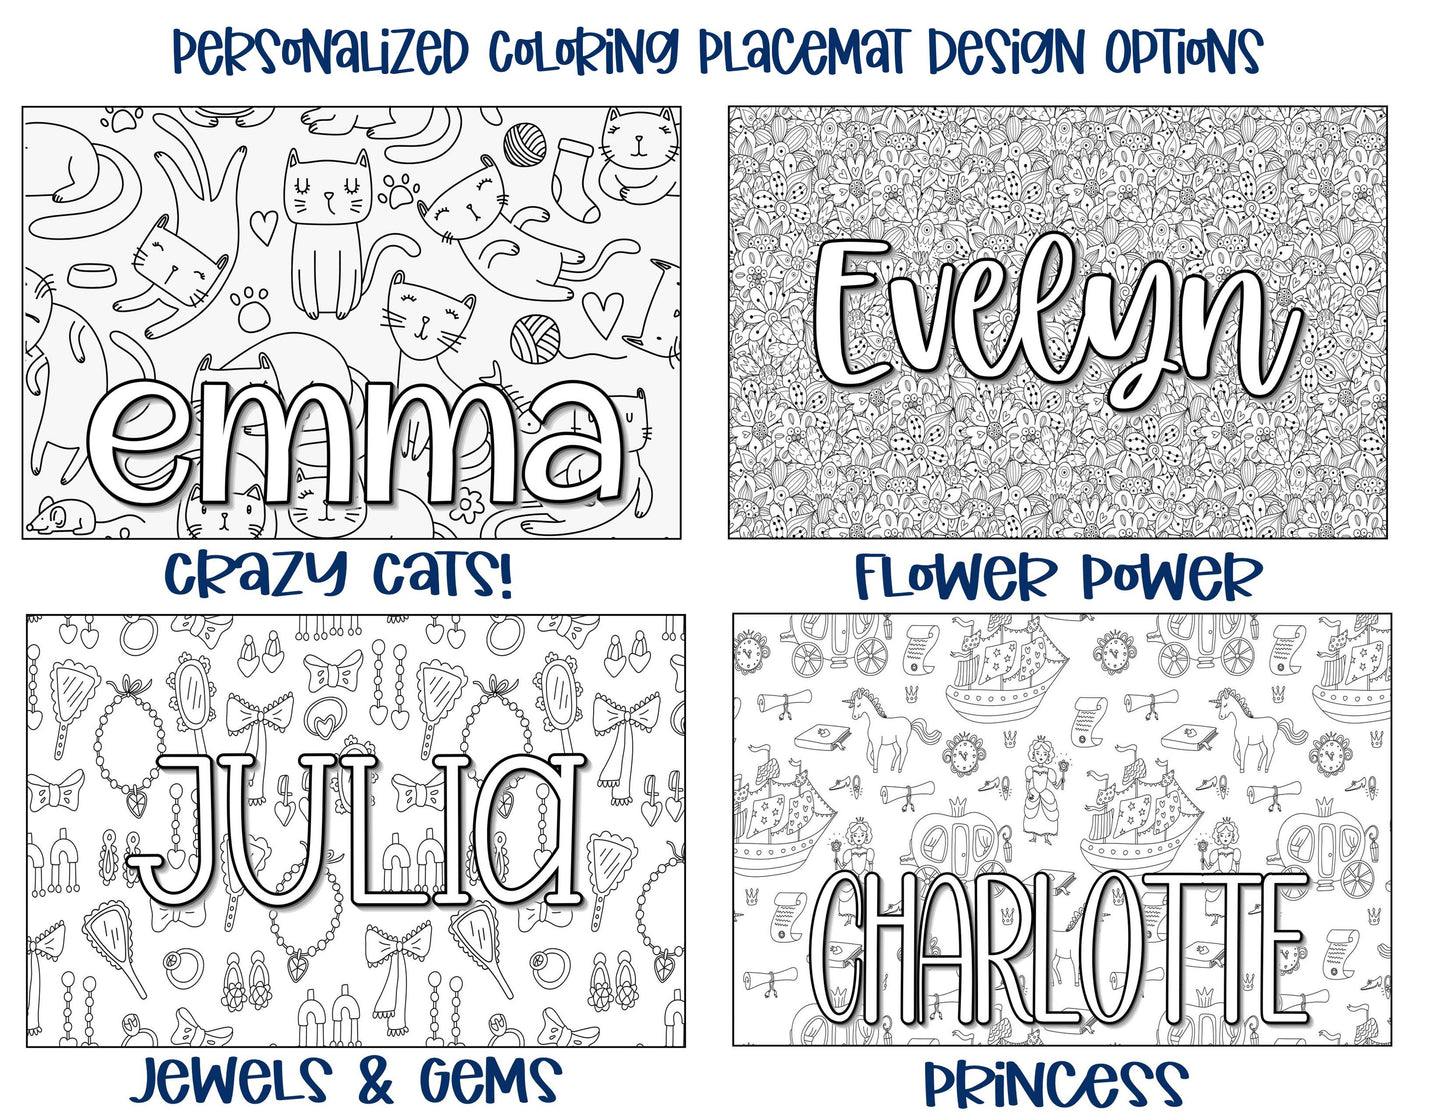 Personalized Coloring Name Placemat